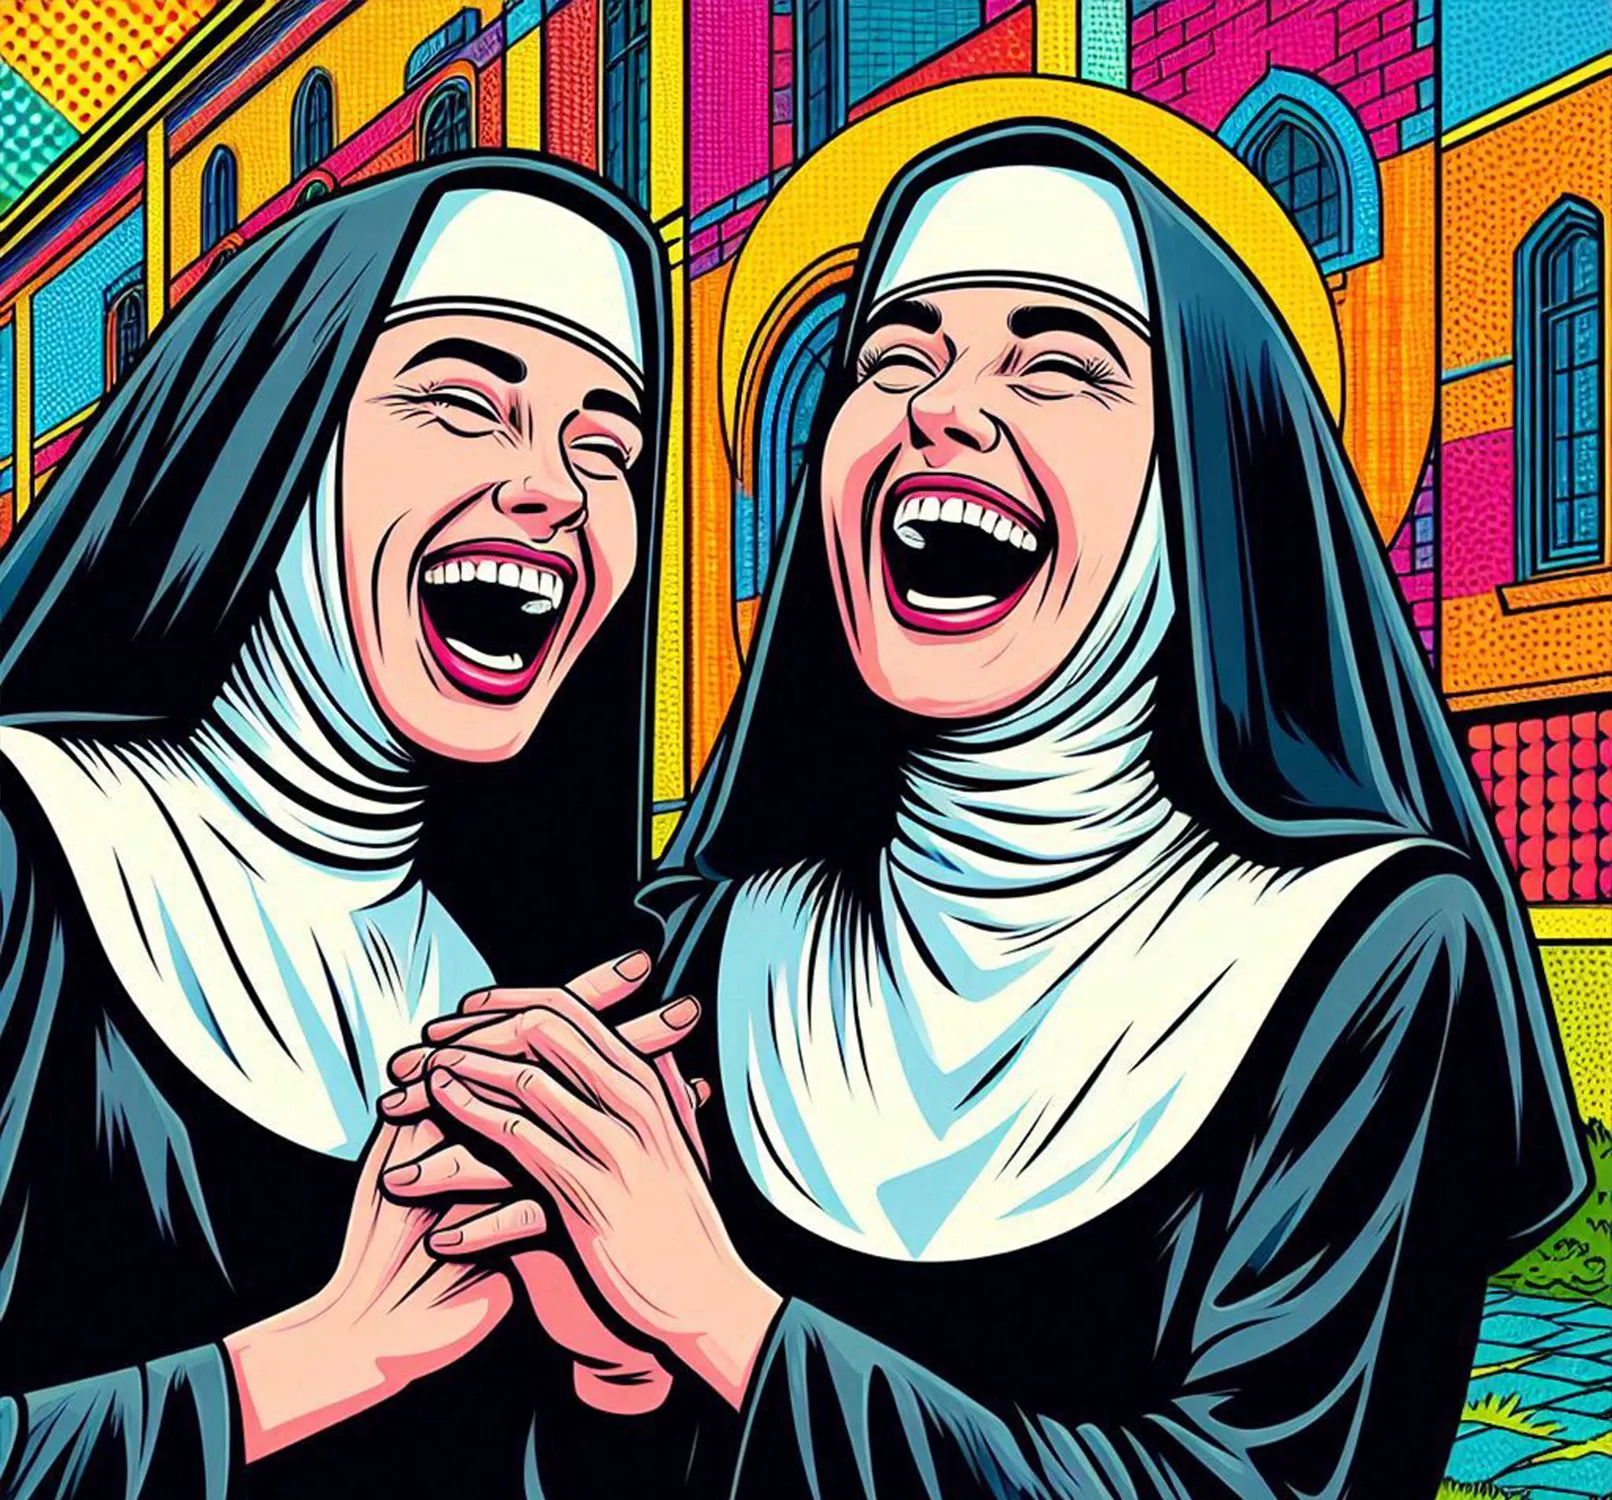 Jokes about priests and nuns.